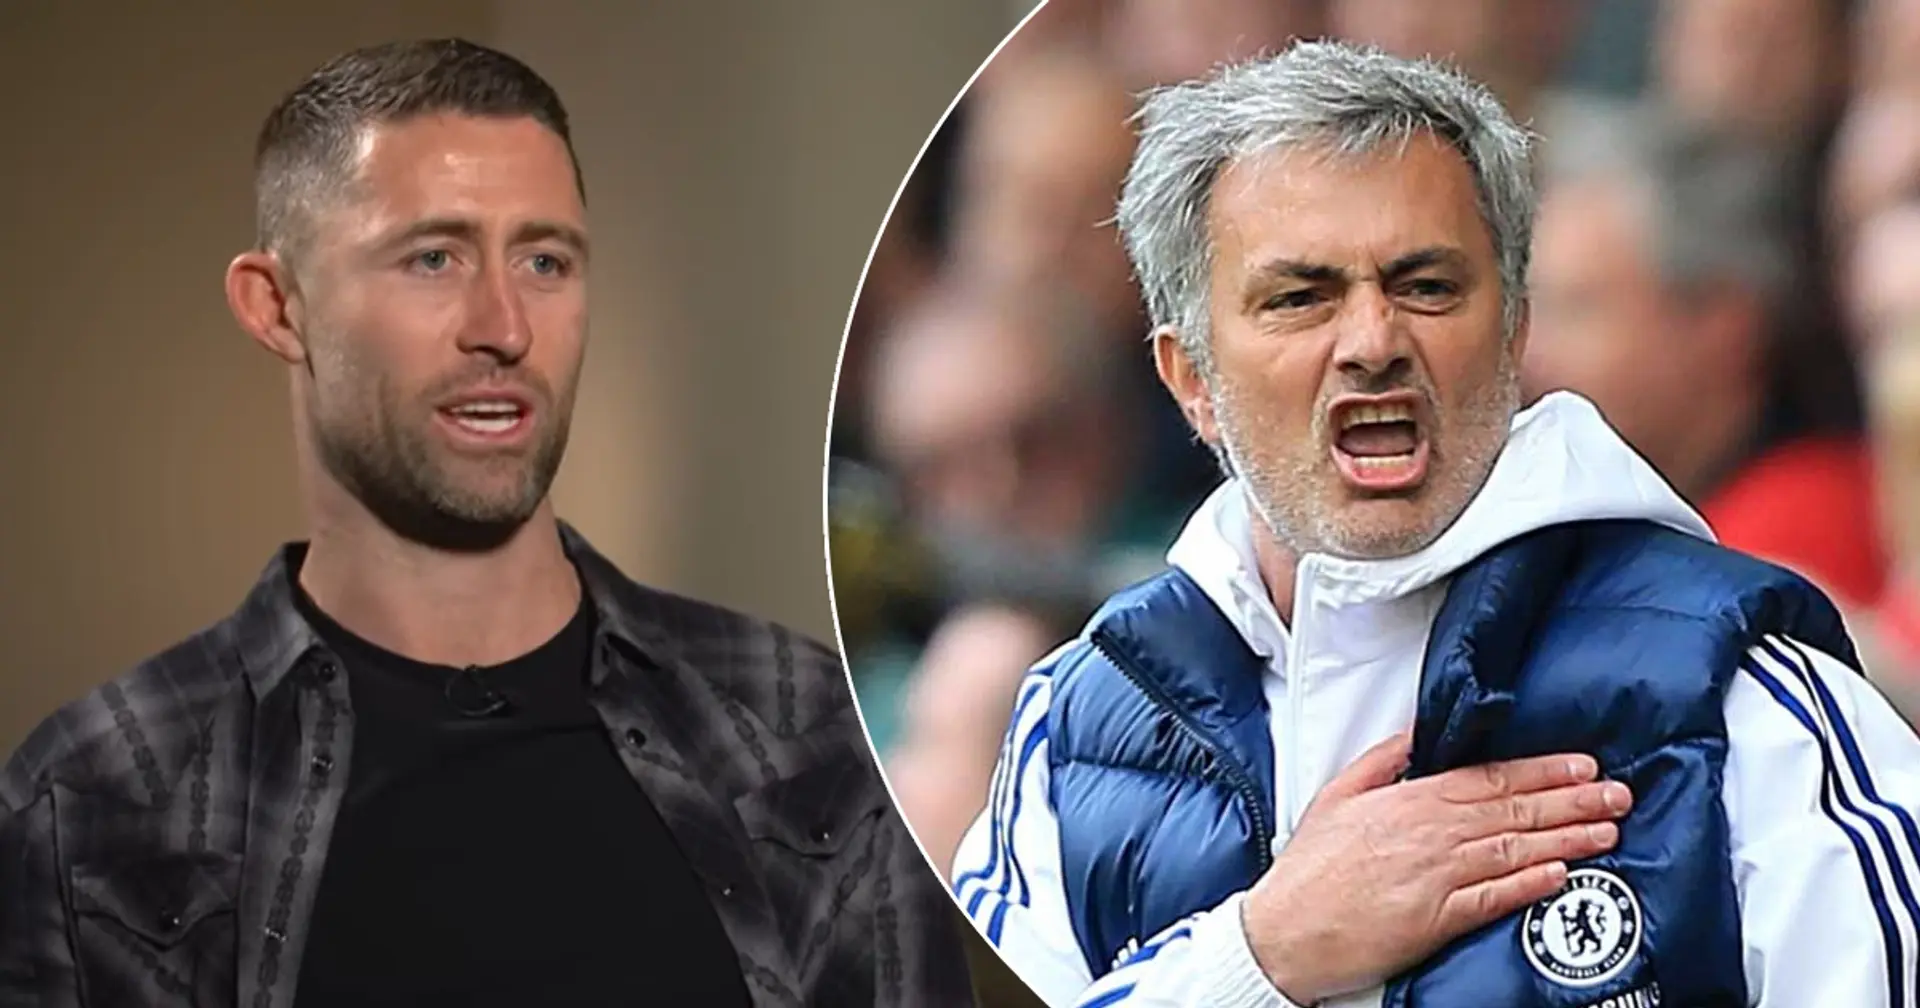 'He knew exactly what he was doing': Cahill recalls how Mourinho left him 'fuming angry' ahead of 2015 League Cup